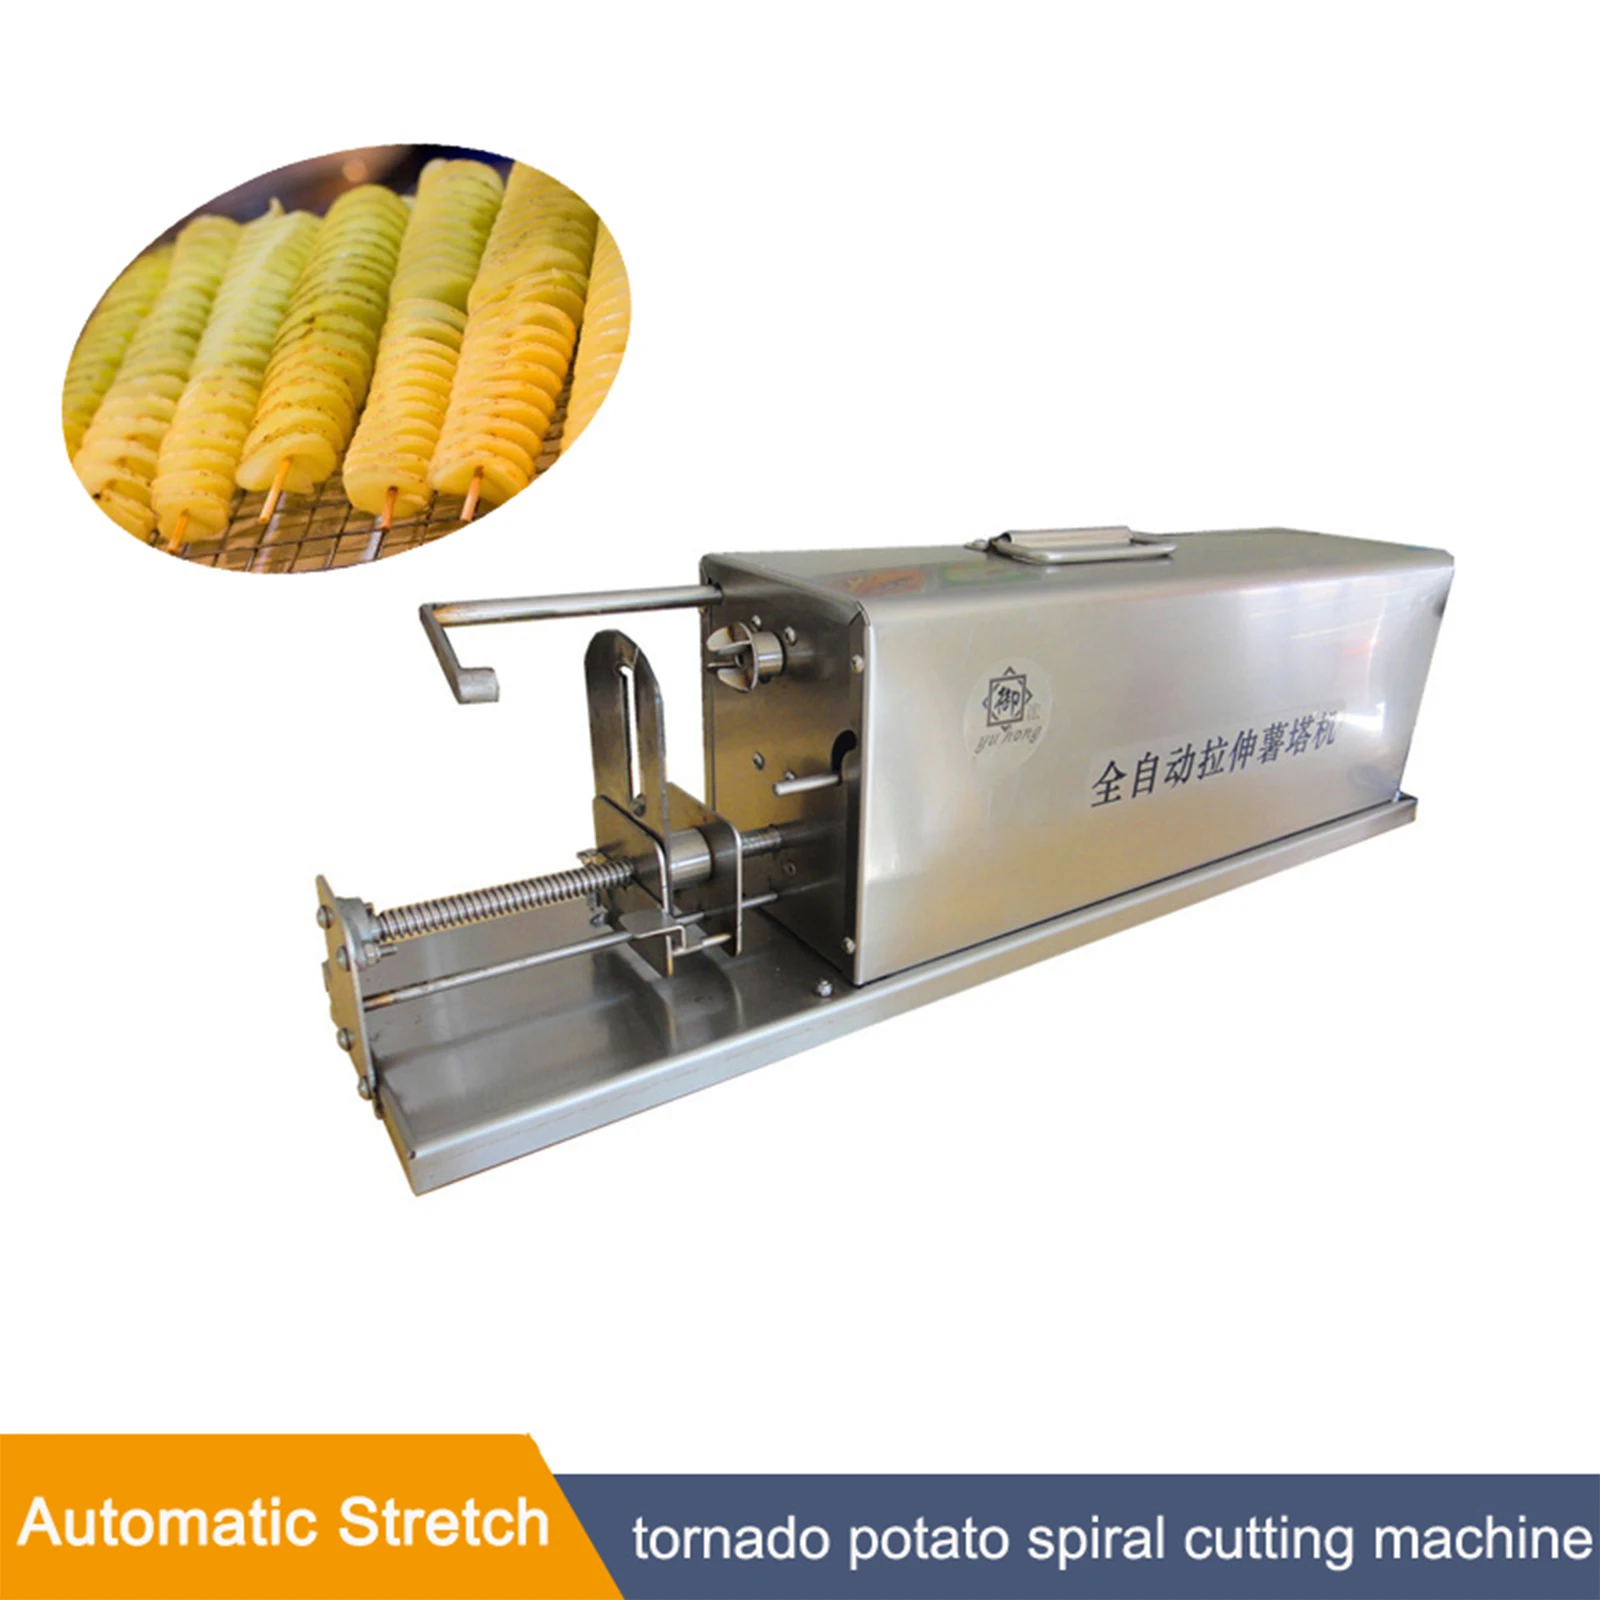 

Automatic Stretch Stainless Steel Potato Slicer Chips Cutter Tornado Potato Machine Spiral Twisted Potatoes On A Stick